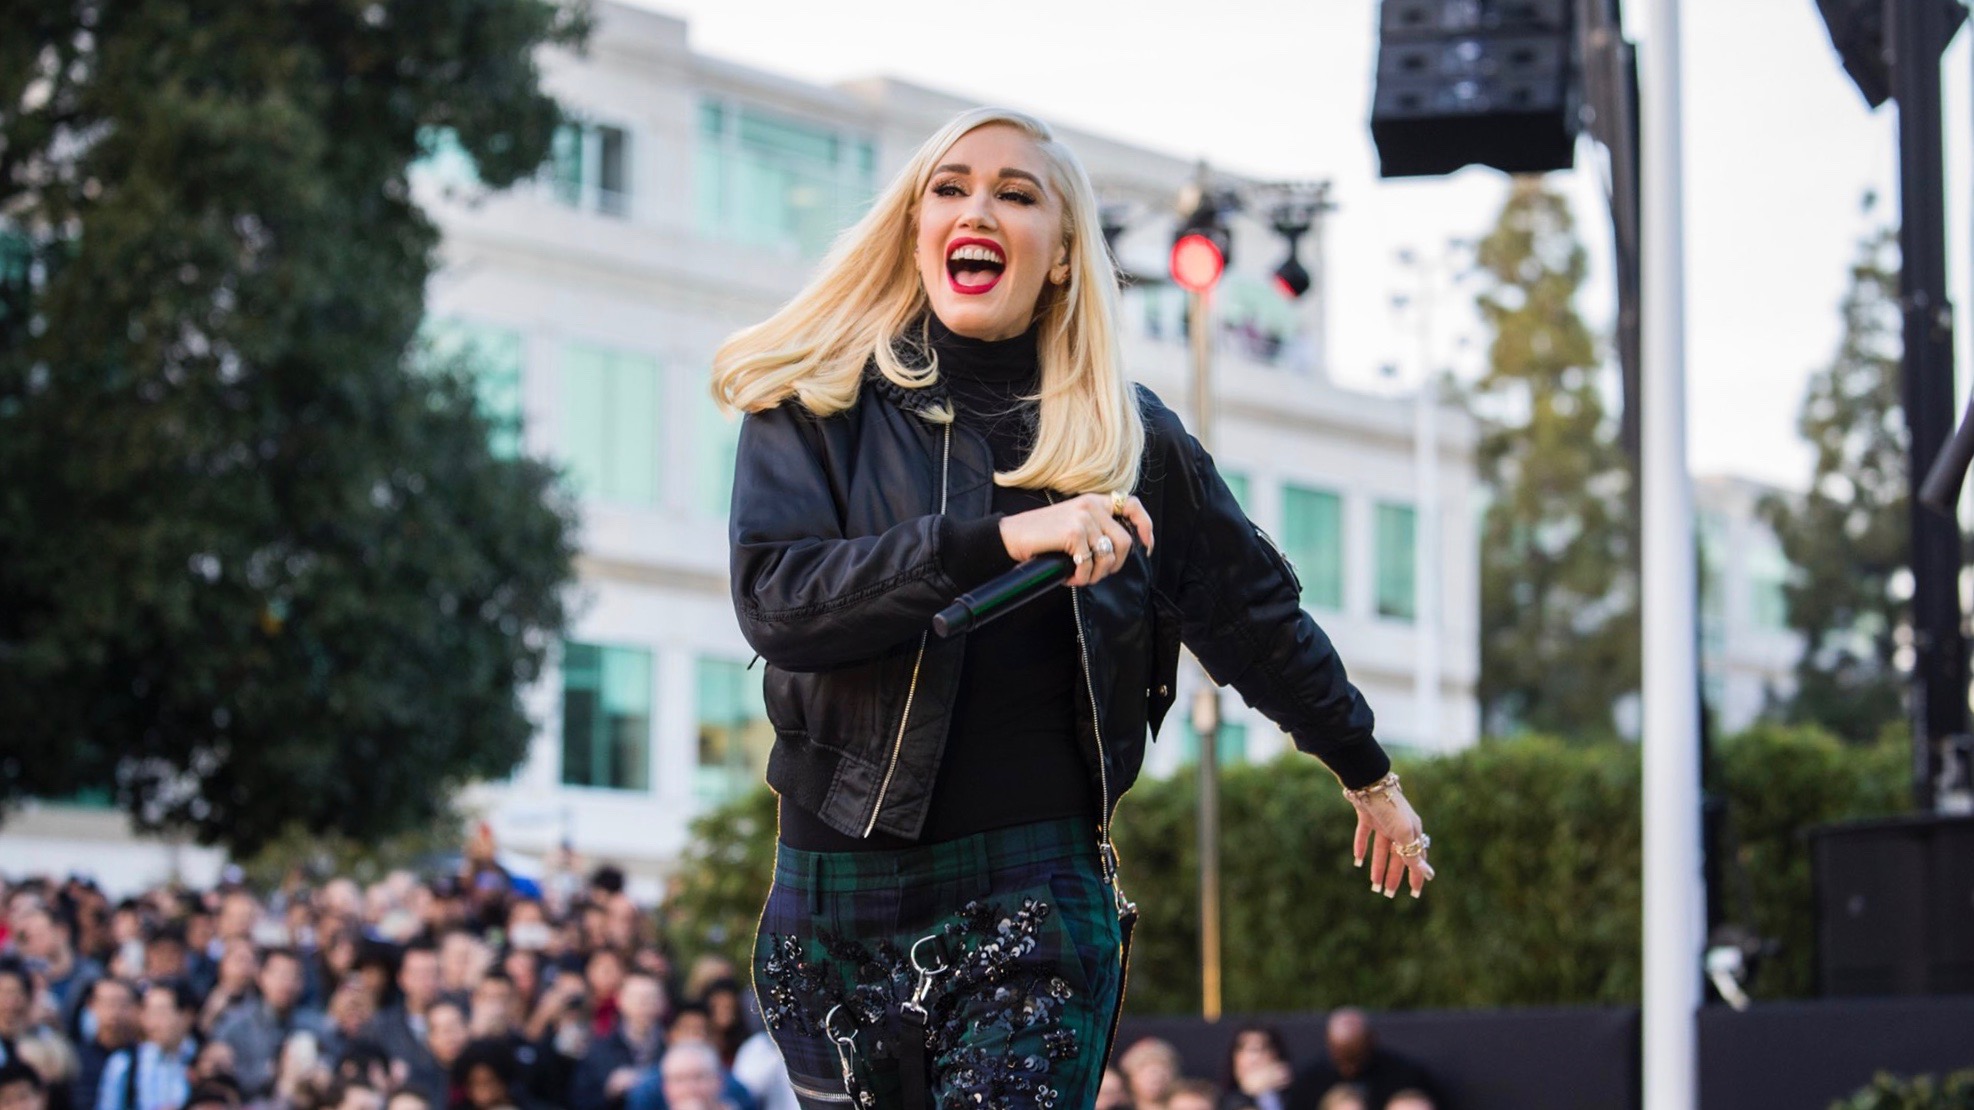 Apple Gets Into The Holiday Spirit W Beer Bash Concert Featuring Gwen Stefani 9to5mac